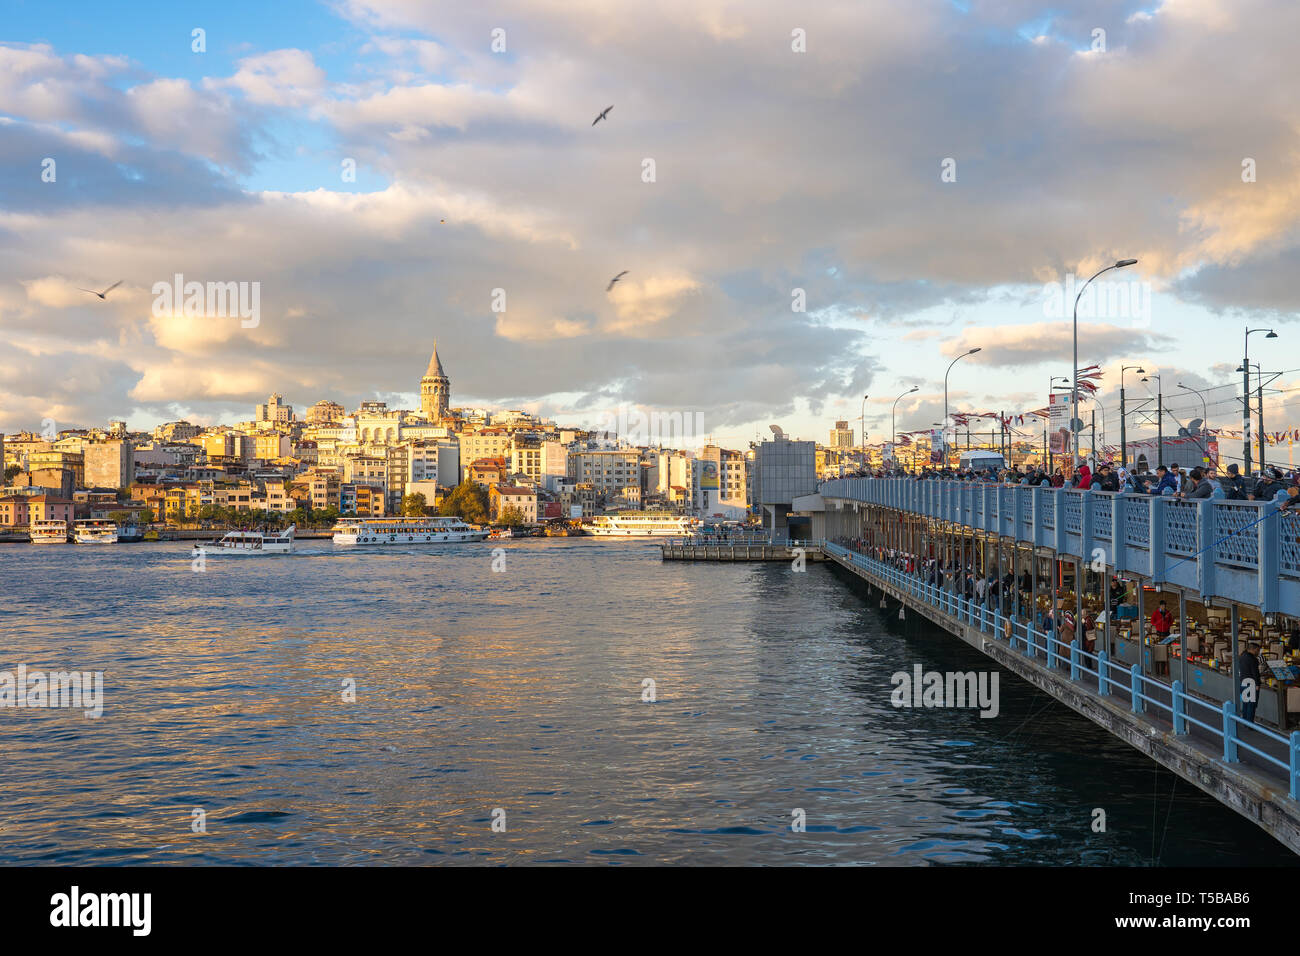 Istanbul, Turkey - October 25, 2018: Istanbul city skyline with view of Galata Tower in Istanbul city, Turkey. Stock Photo